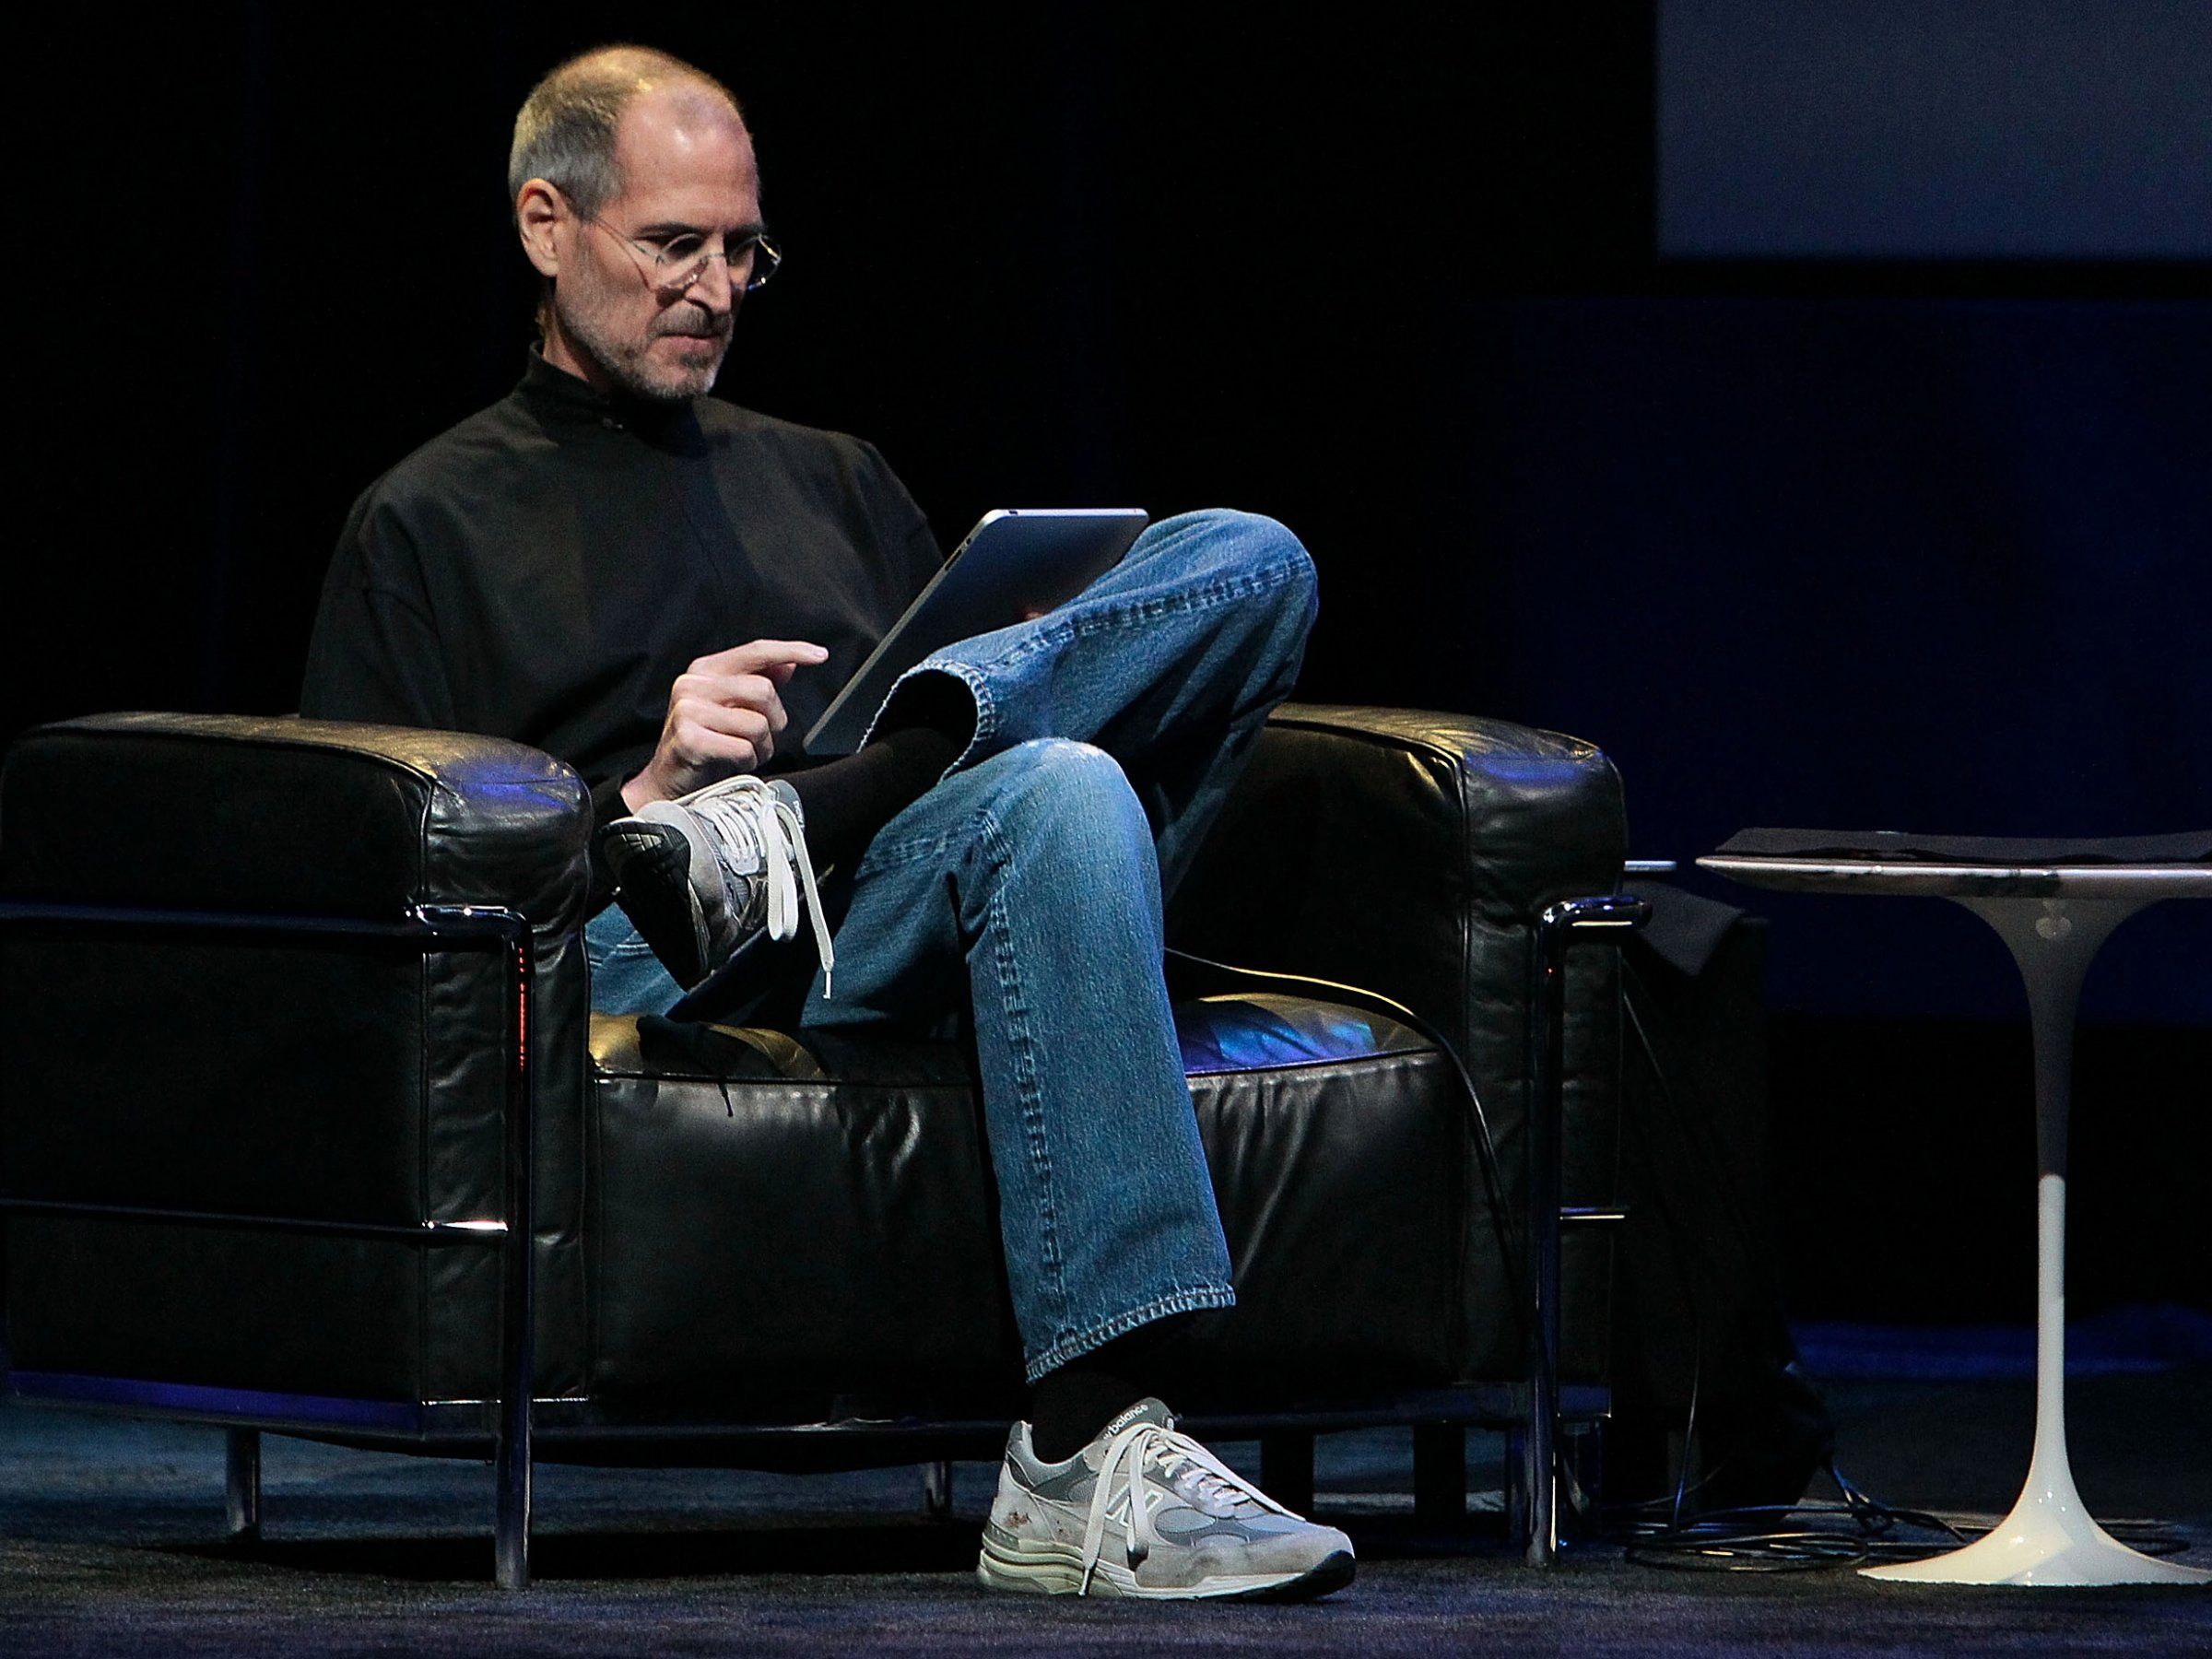 Apple CEO Steve Jobs demonstrates the iPad in 2010. (Photo Credit: Justin Sullivan / Getty Images)